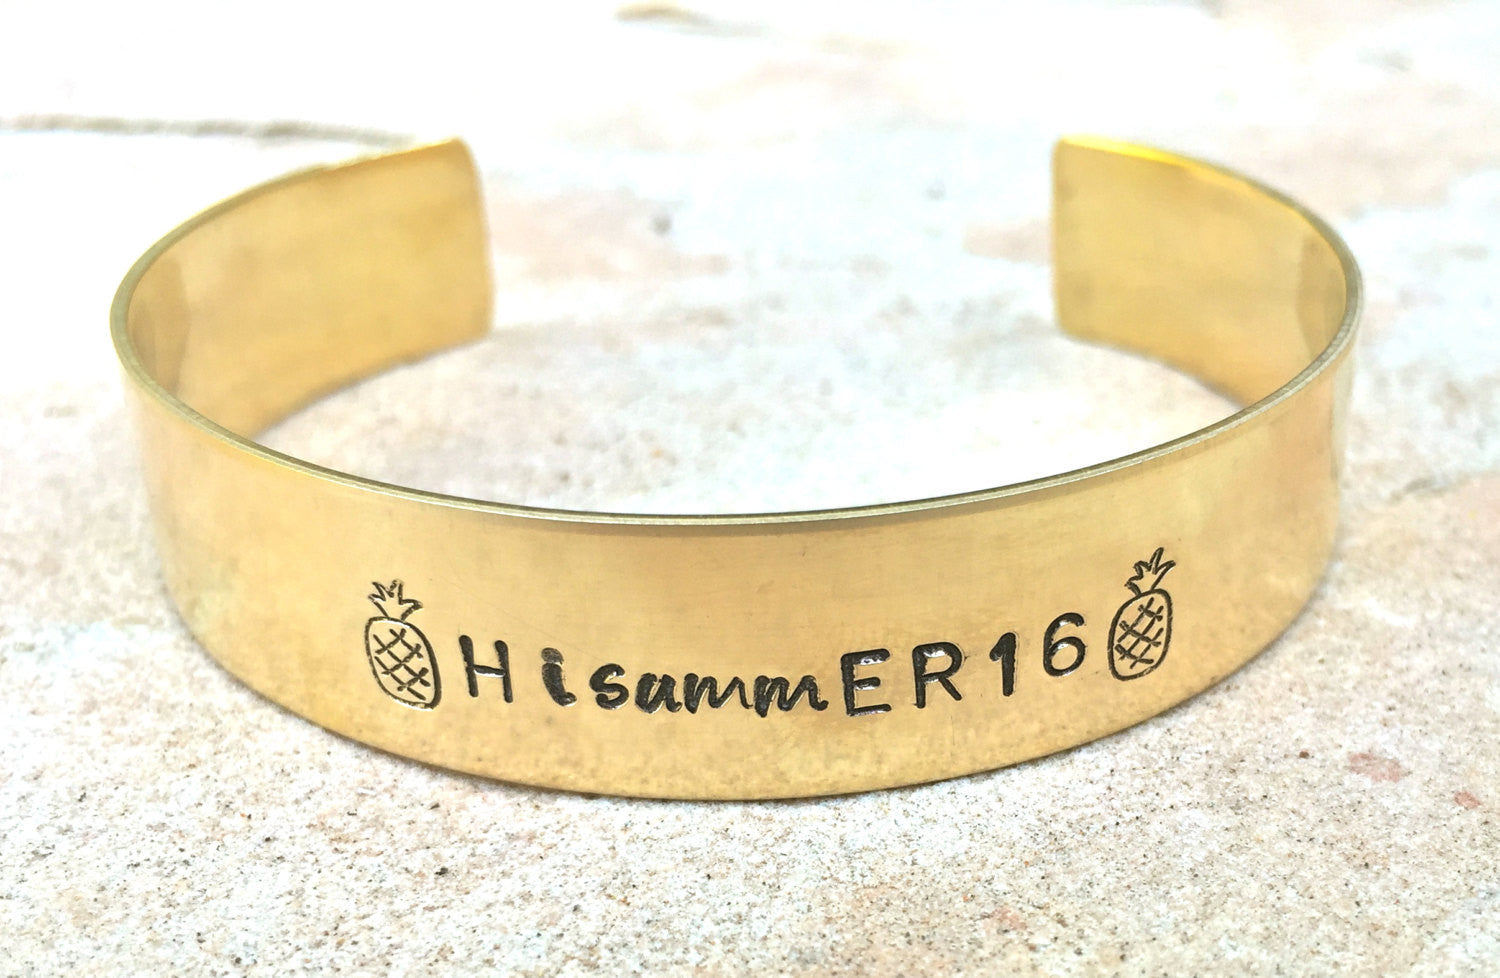 Hawaiian Jewelry, Hawaiian Cuff, Custom Cuff, Personalized Bracelets, Pineapple Bracelet, Hand Stamped Bracelet, natashaaloha, Hawaii - Natashaaloha, jewelry, bracelets, necklace, keychains, fishing lures, gifts for men, charms, personalized, 